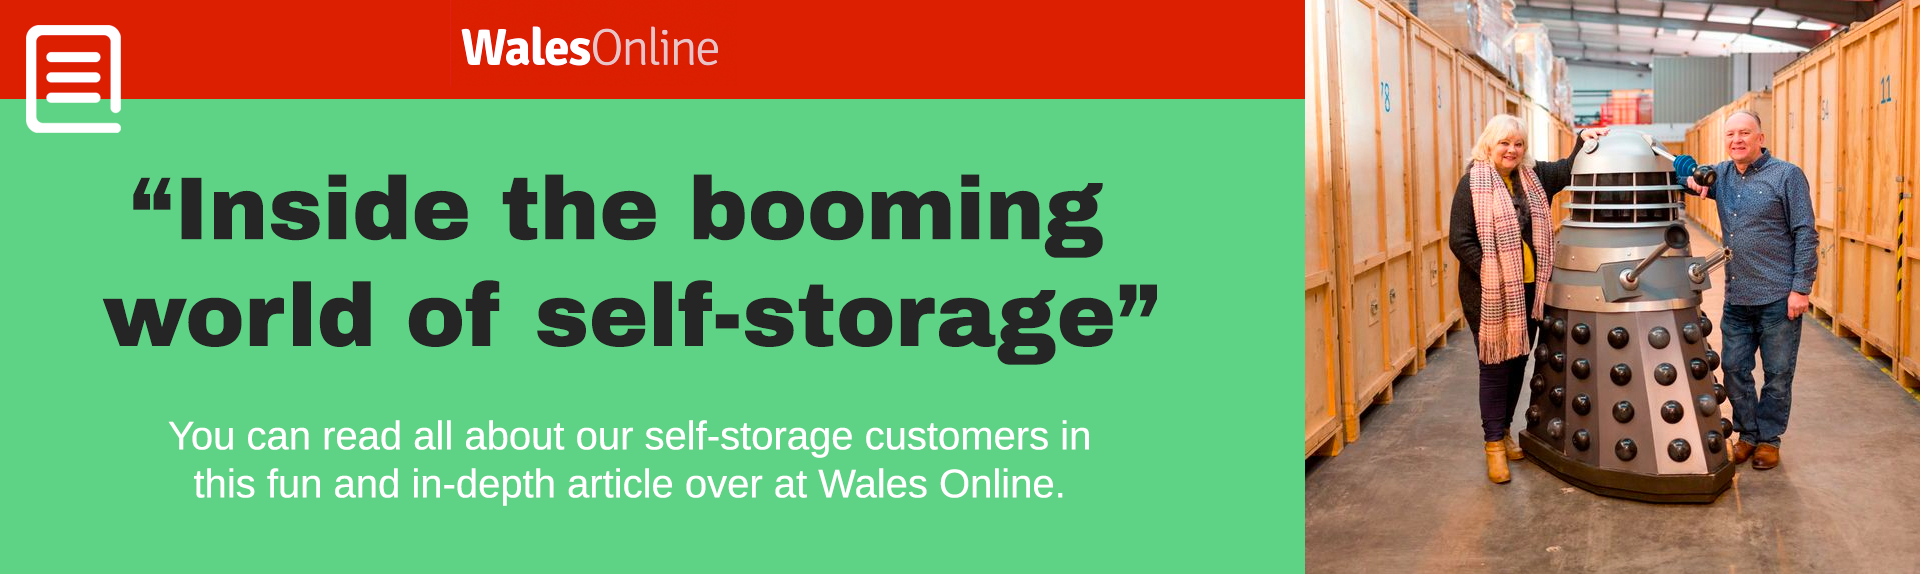 Inside the booming world of self-storage